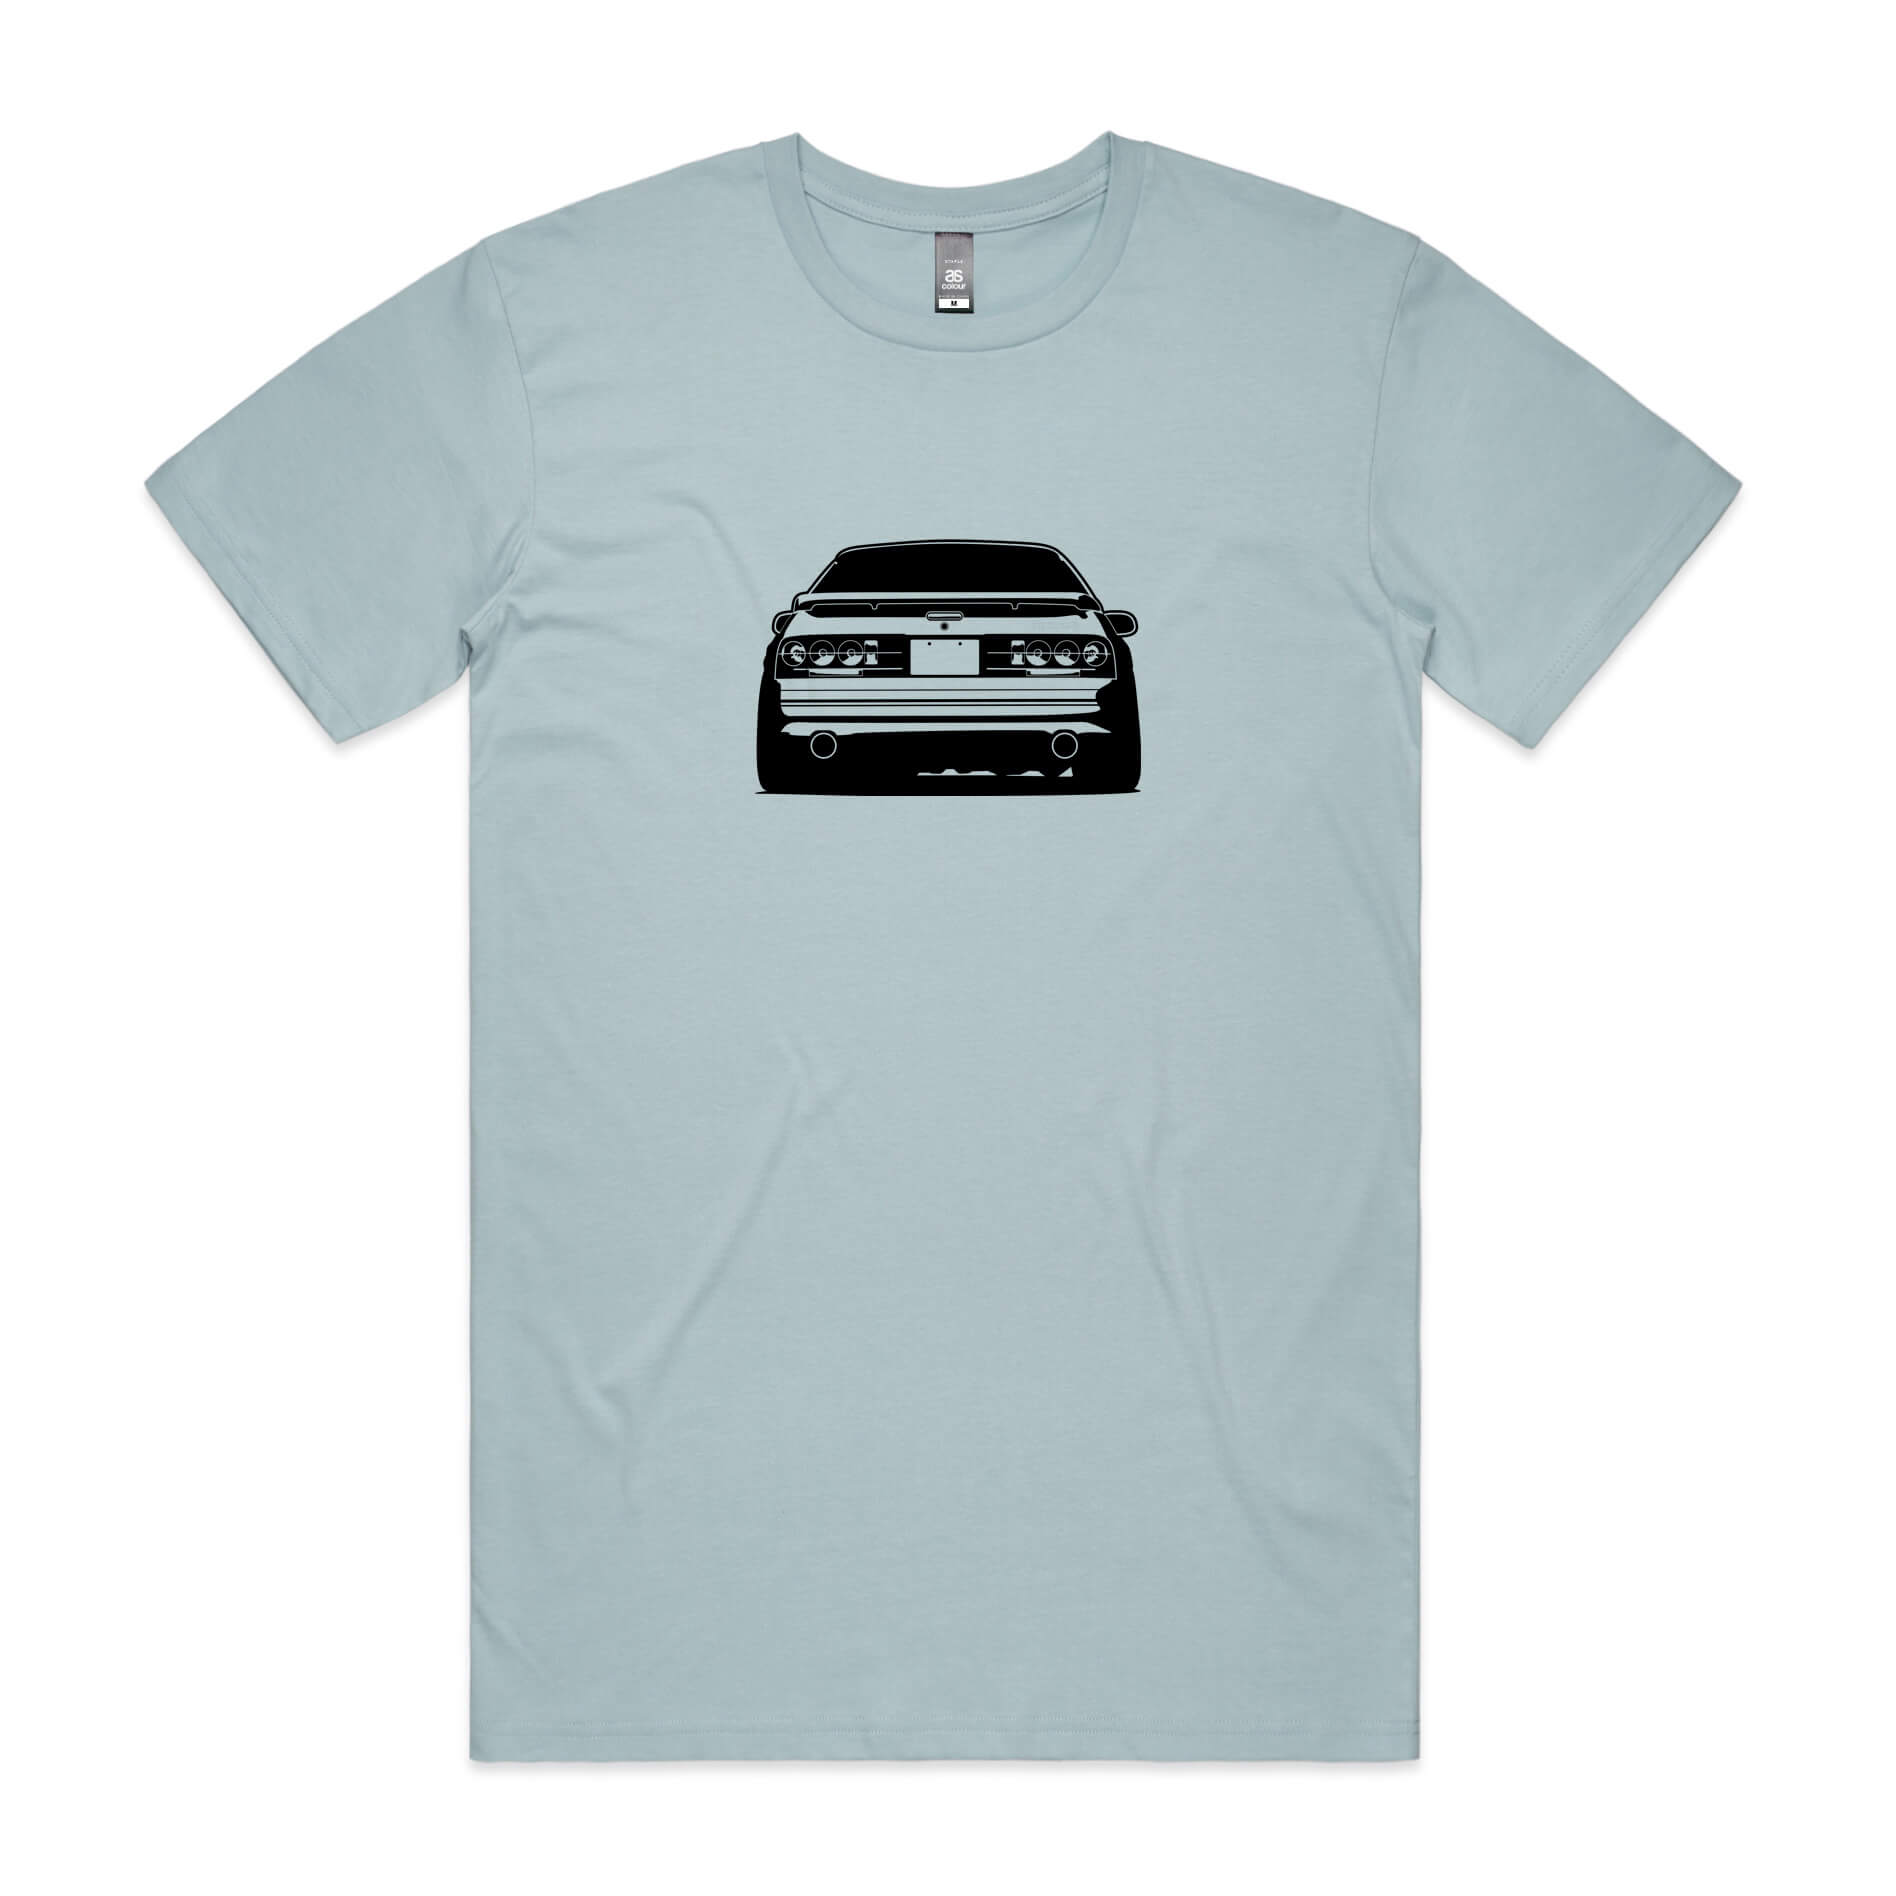 Mazda RX7 FC t-shirt in light blue with a black car graphic